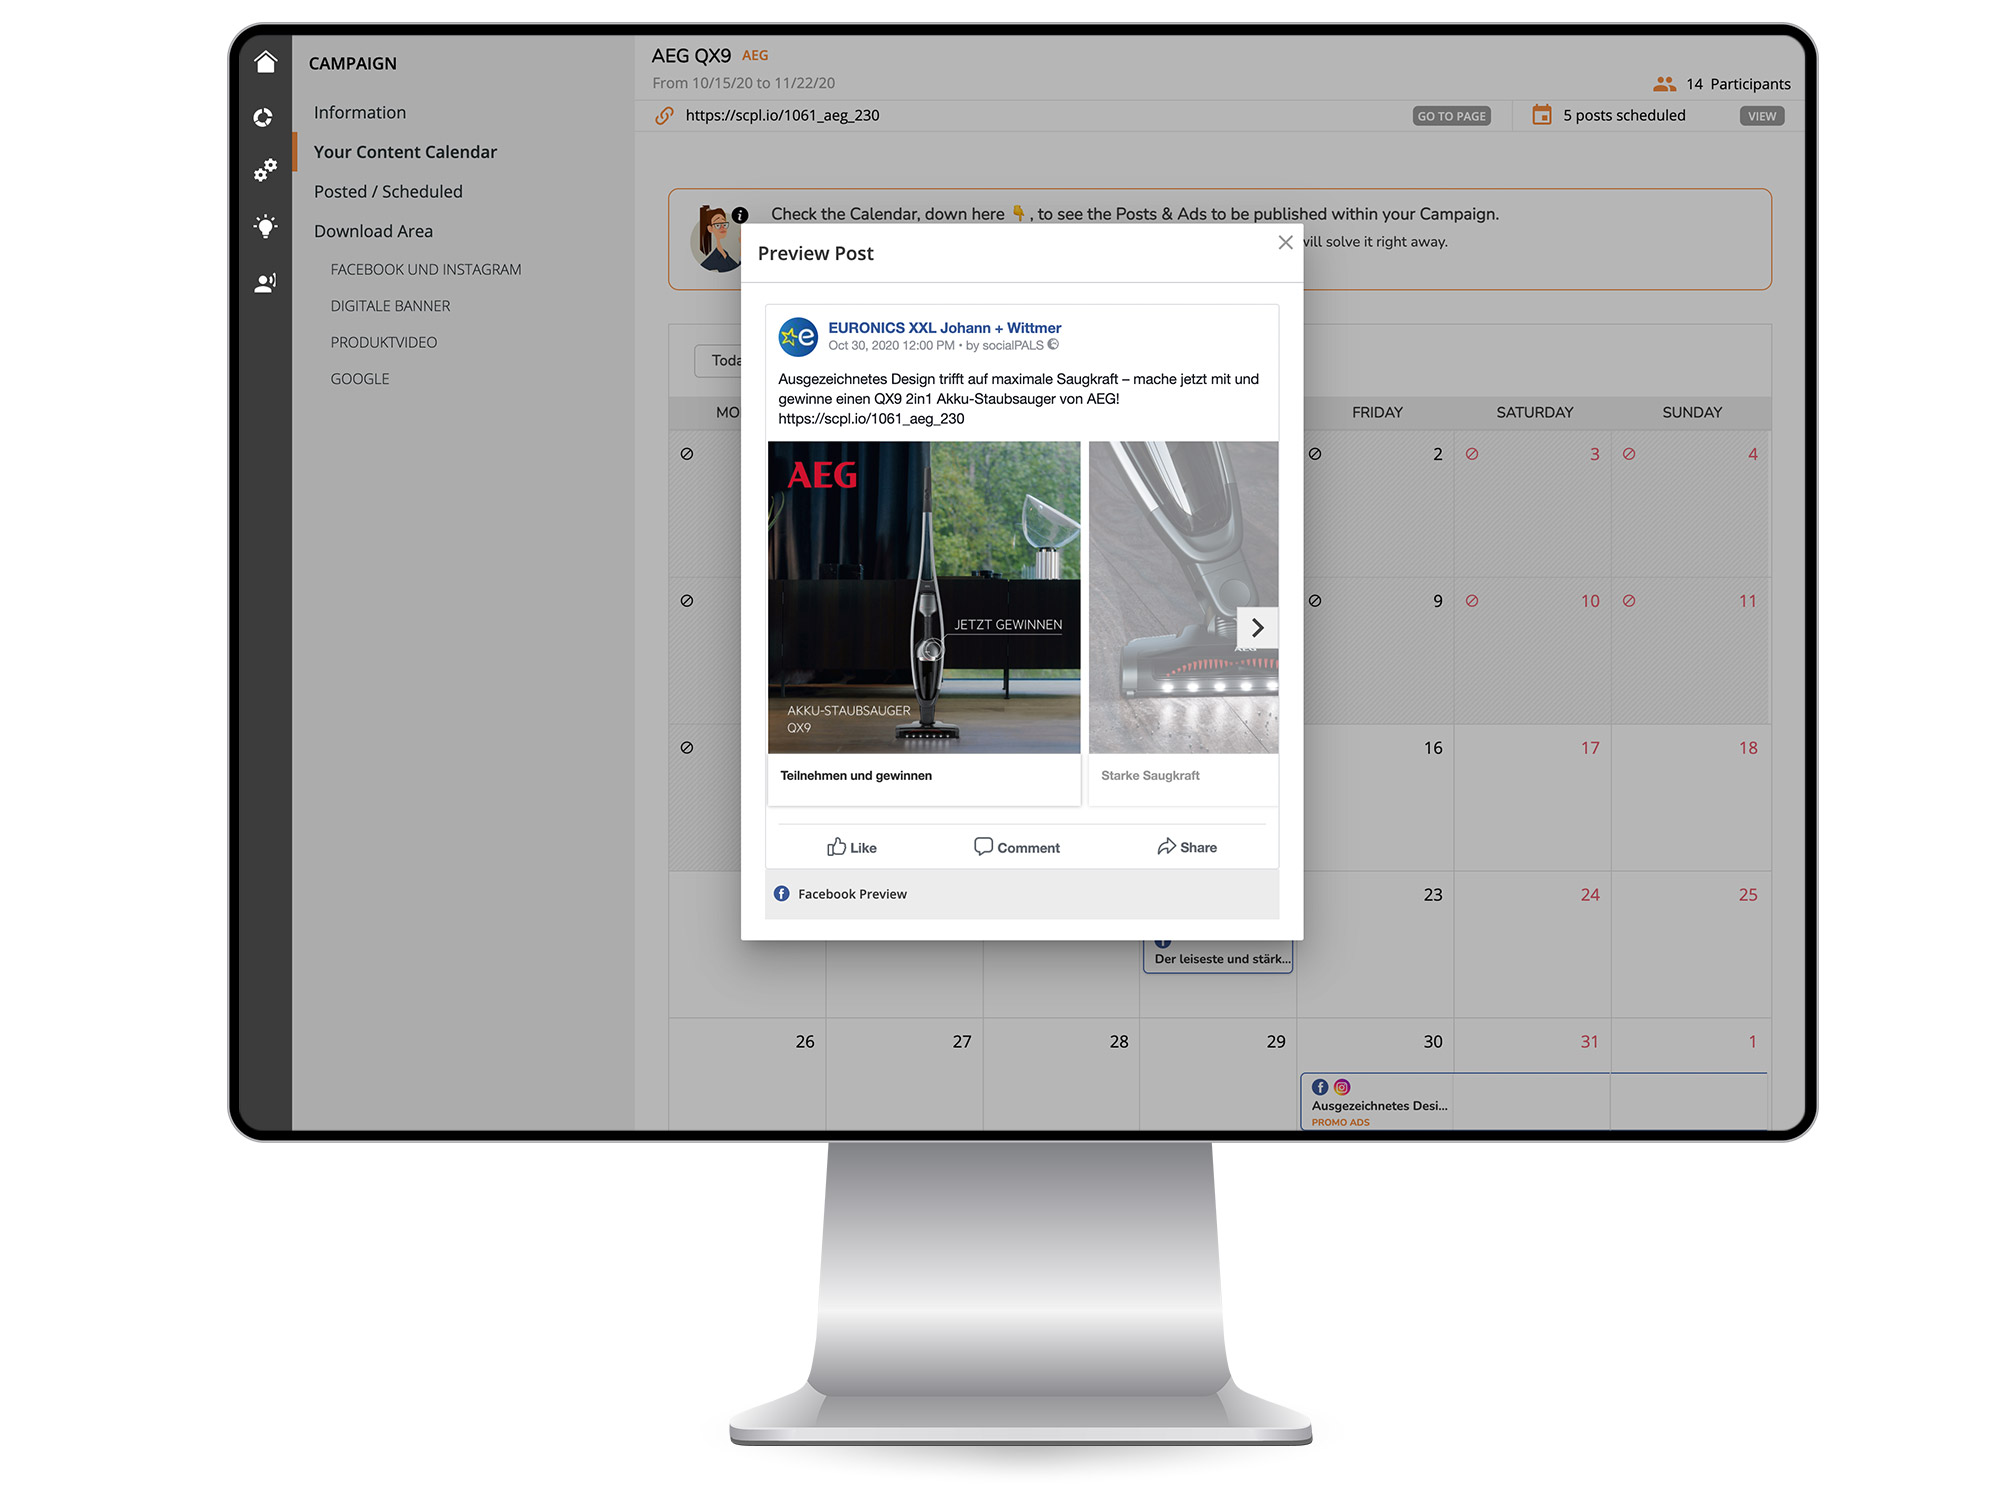 With the content calendar, each campaign can be customized in no time